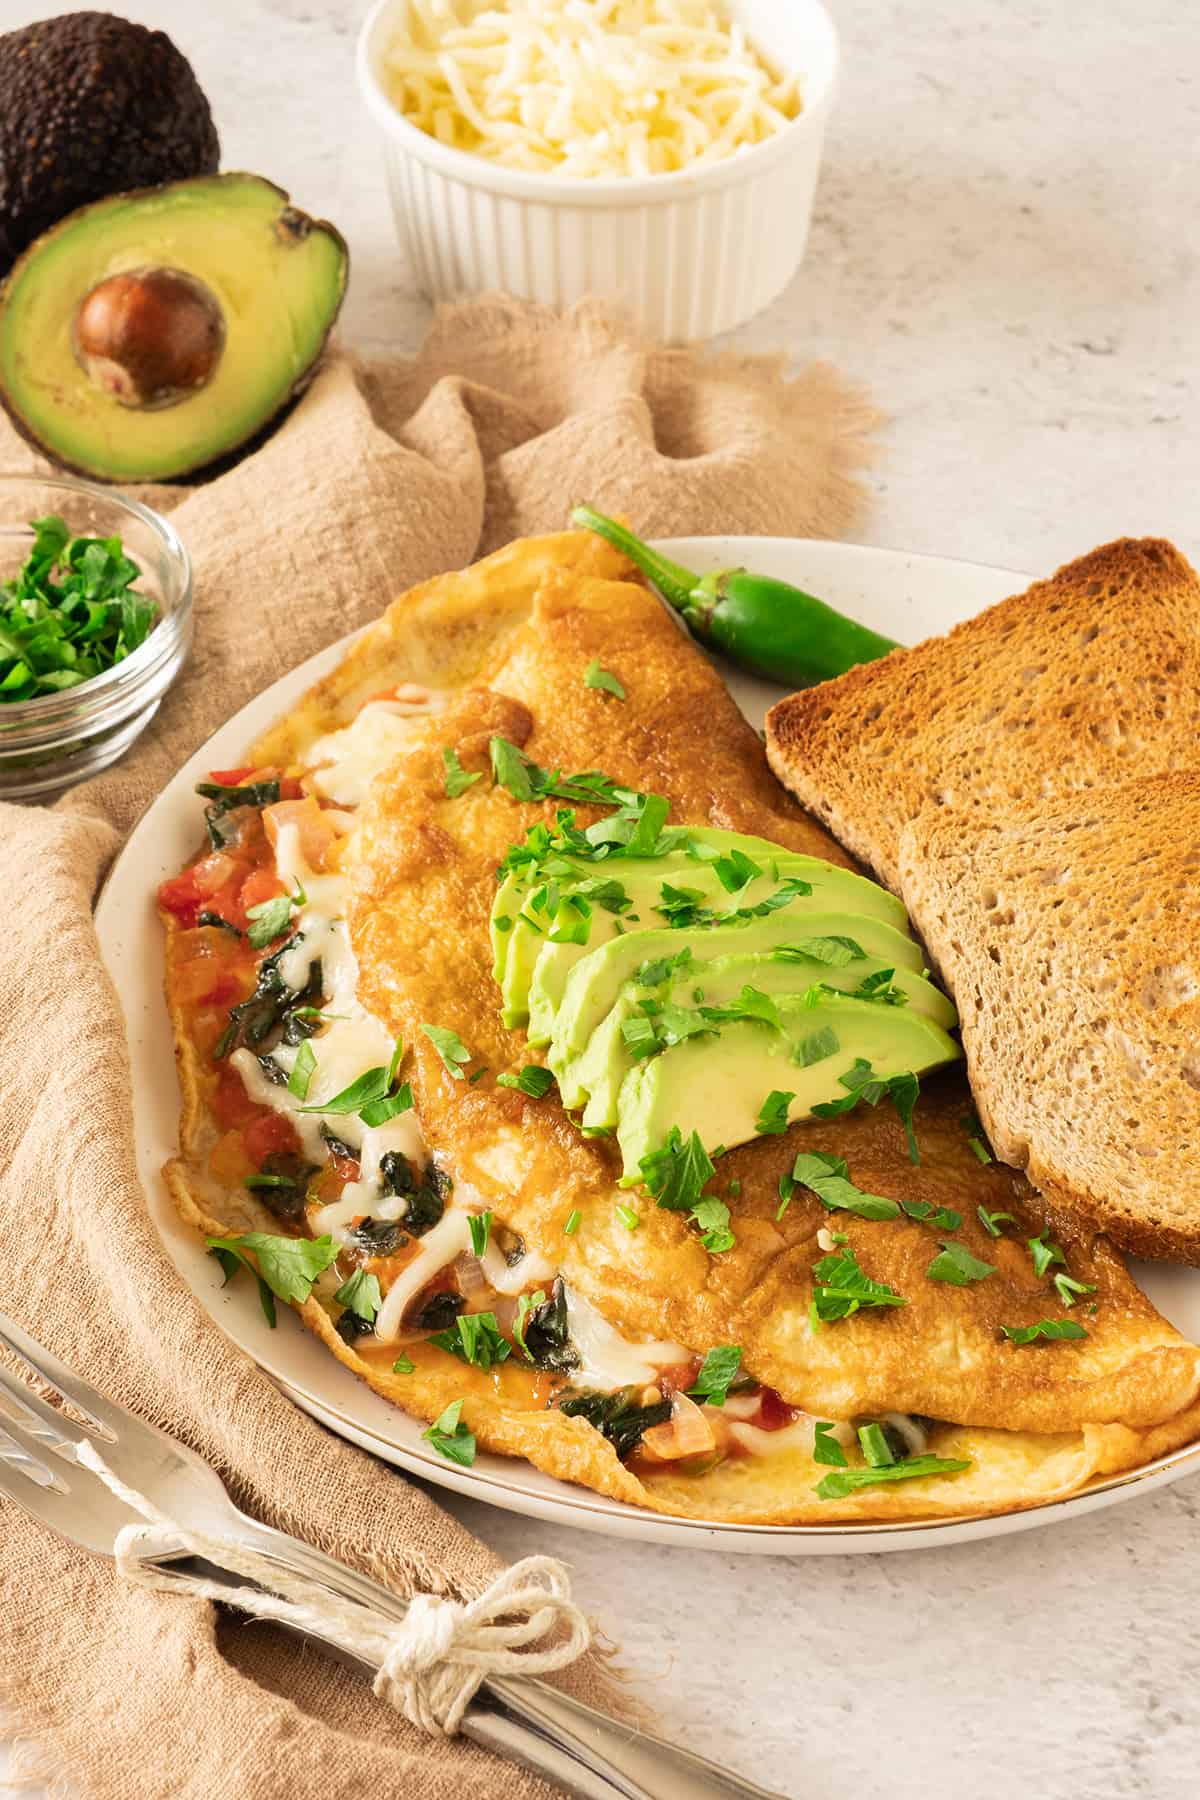 A California Omelette topped with avocado slices and chopped cilantro and served next to toast.